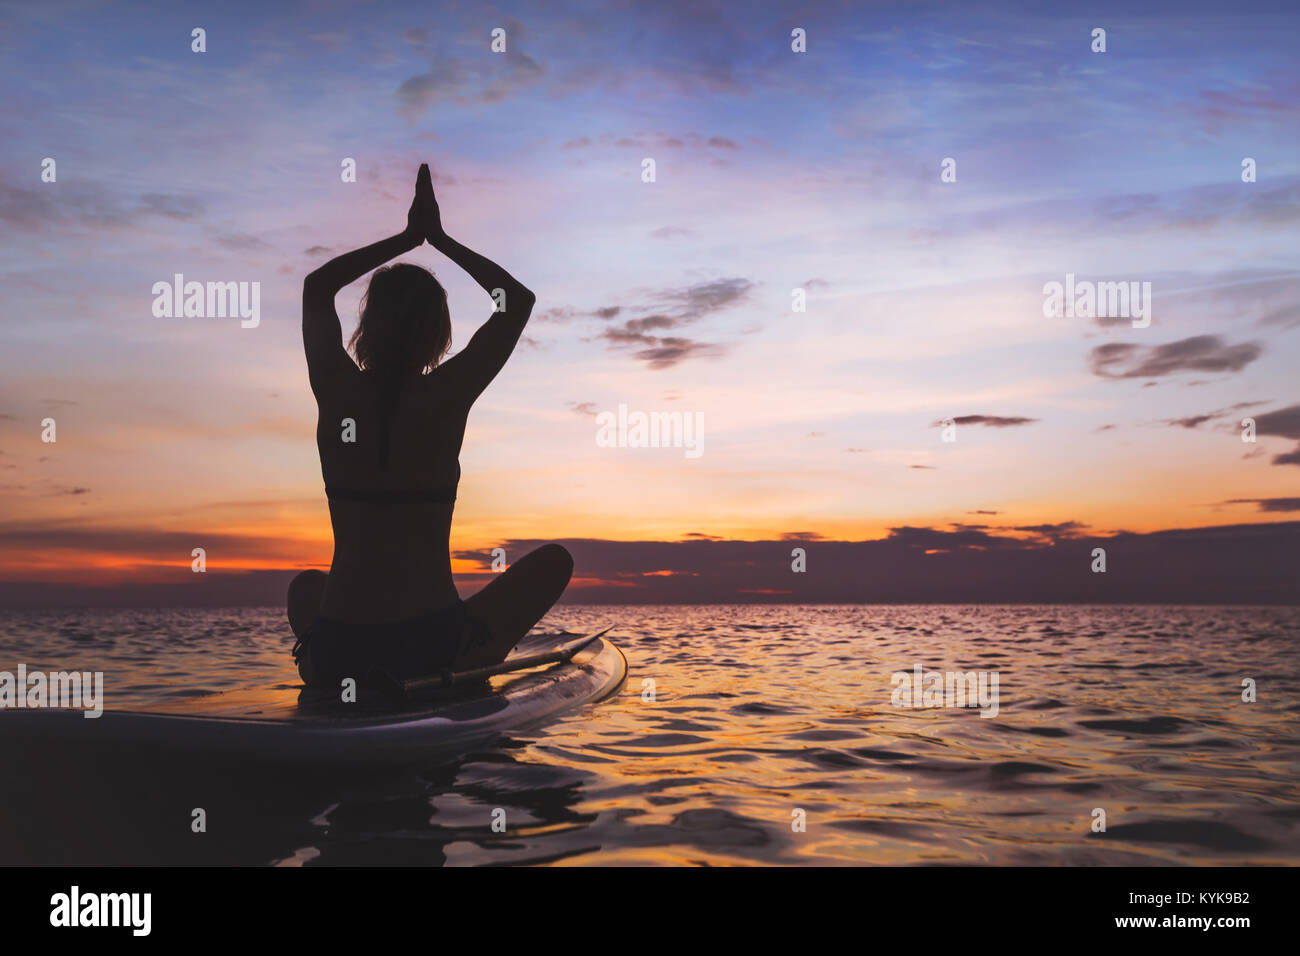 yoga on sup board, silhouette of woman on the beach Stock Photo